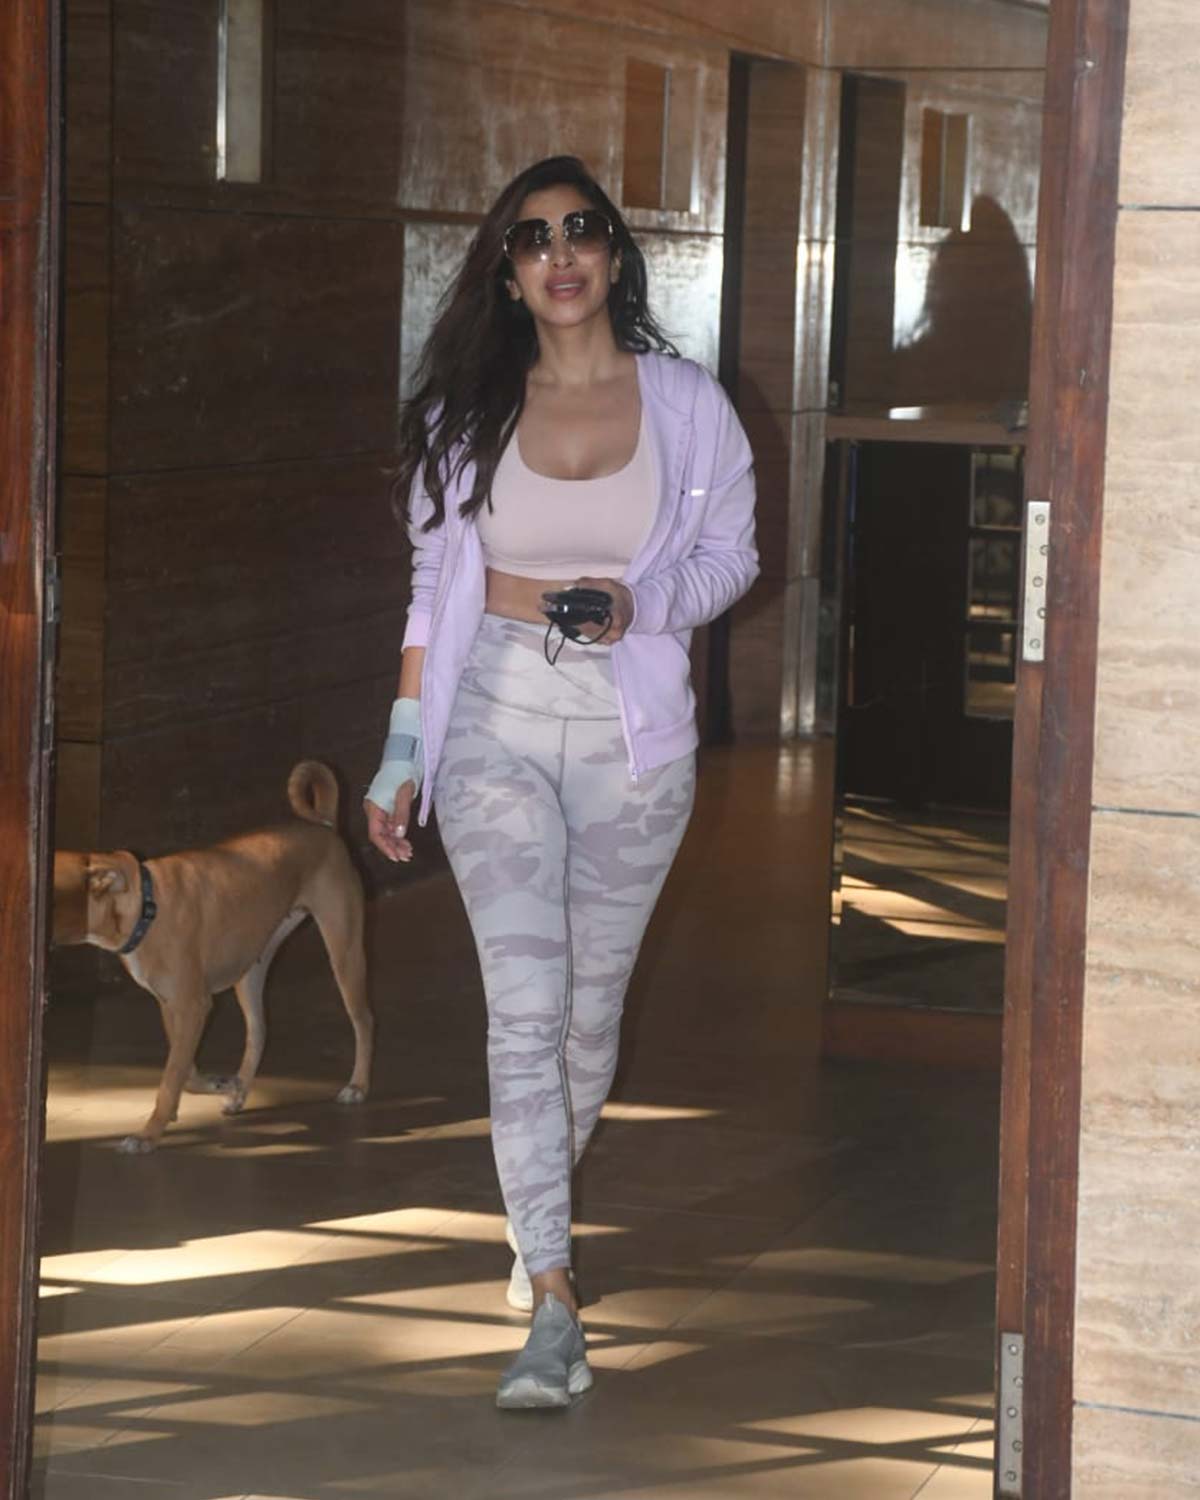 JINNA LOVES HER CASUAL STREET STYLE: KYLIE JENNER LOOKS COOL IN